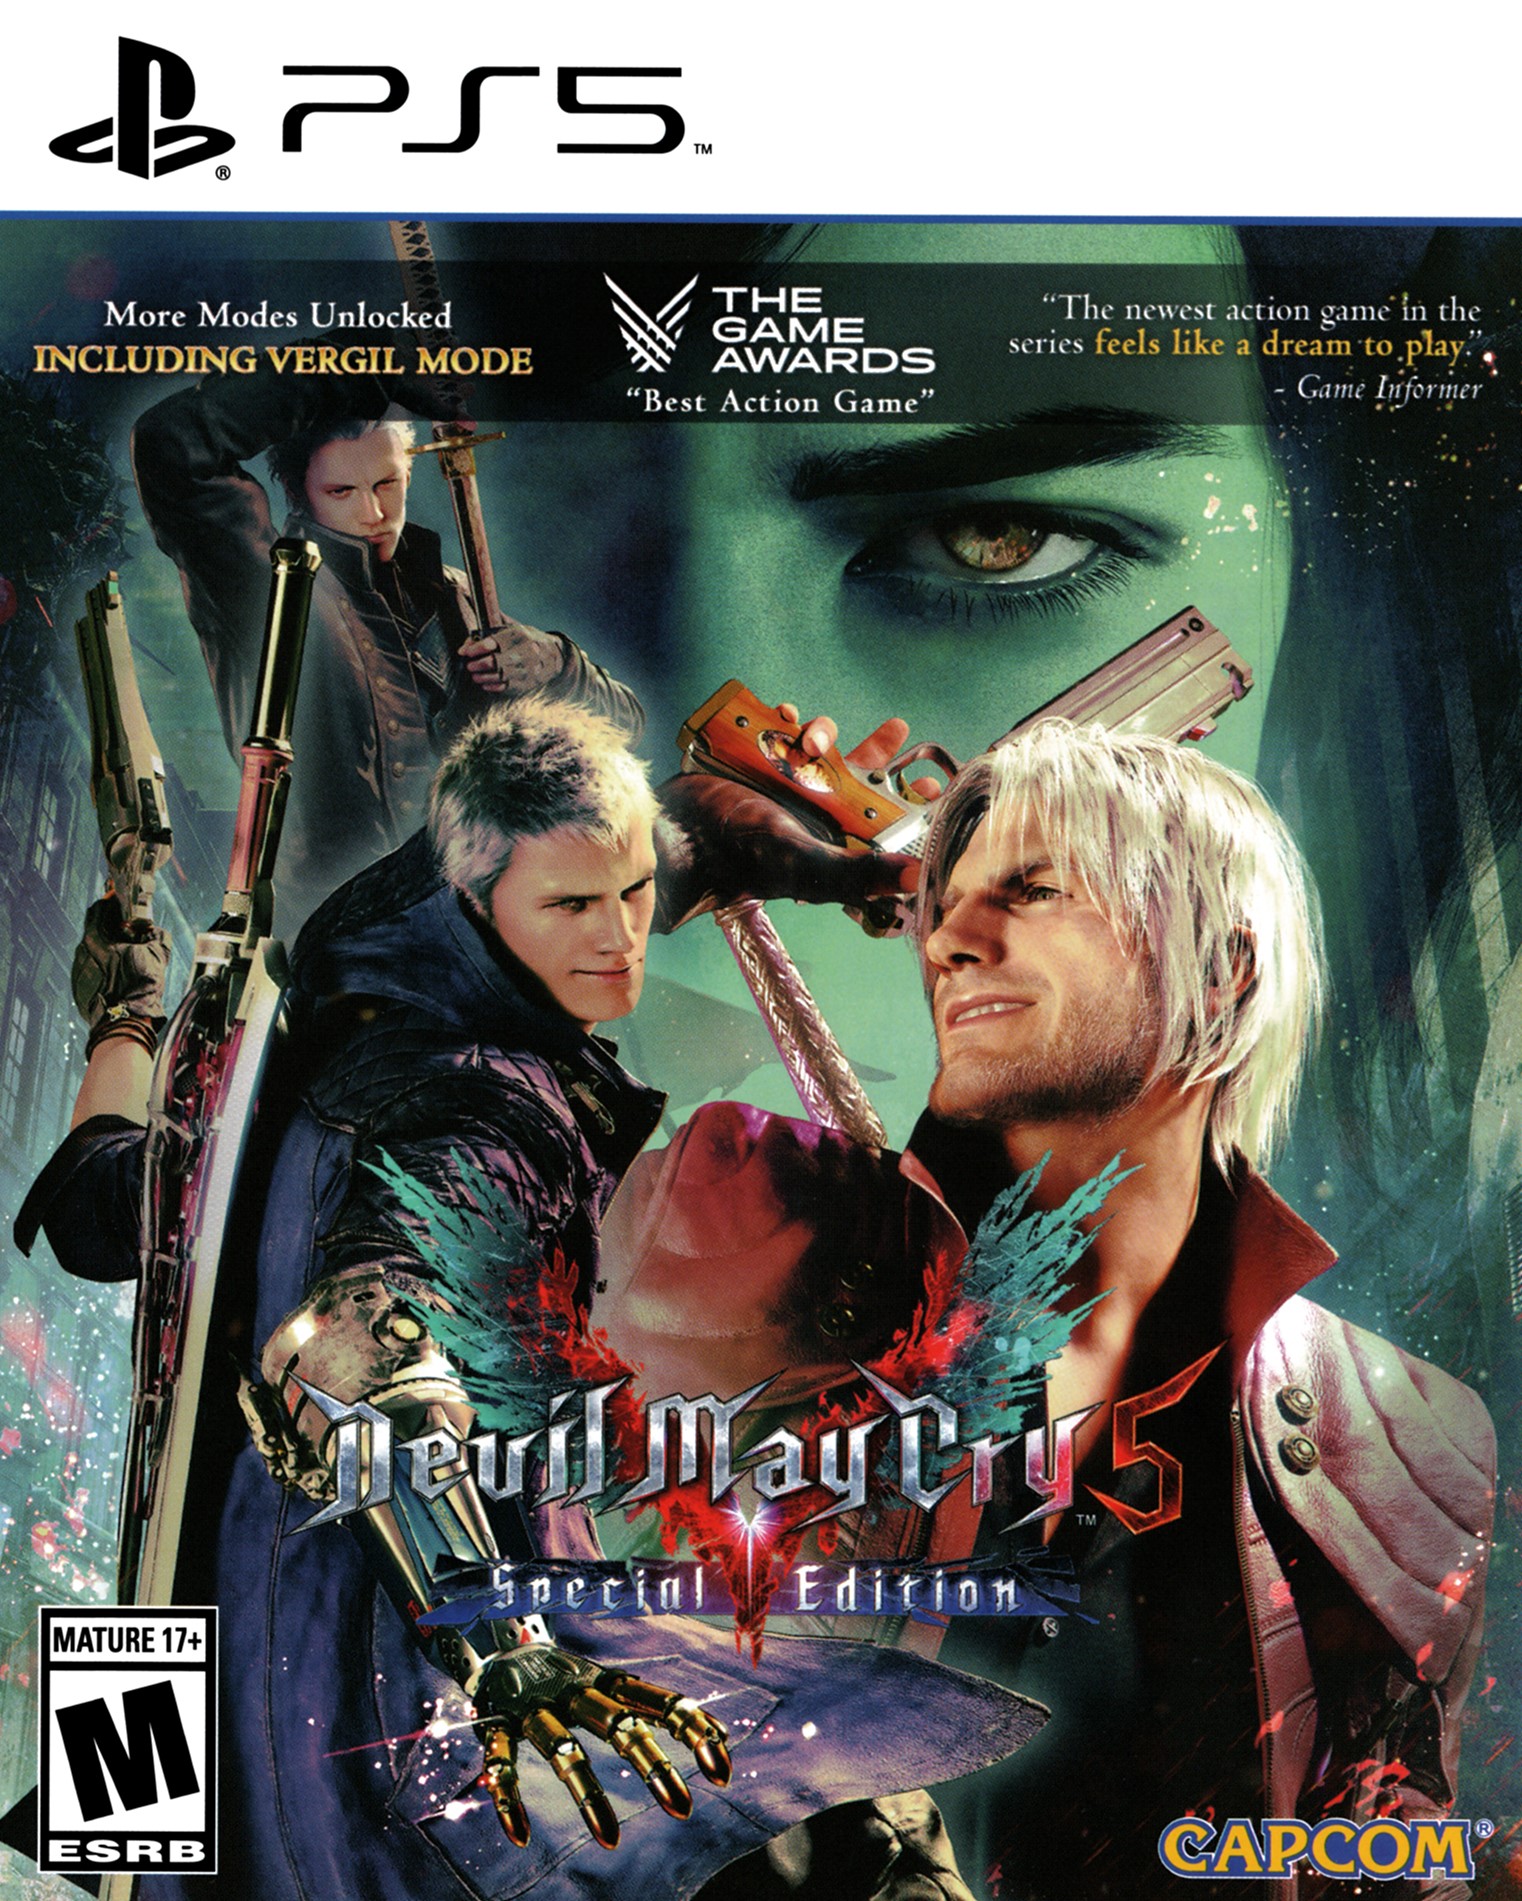 'Devil May Cry 5: Special Edition'